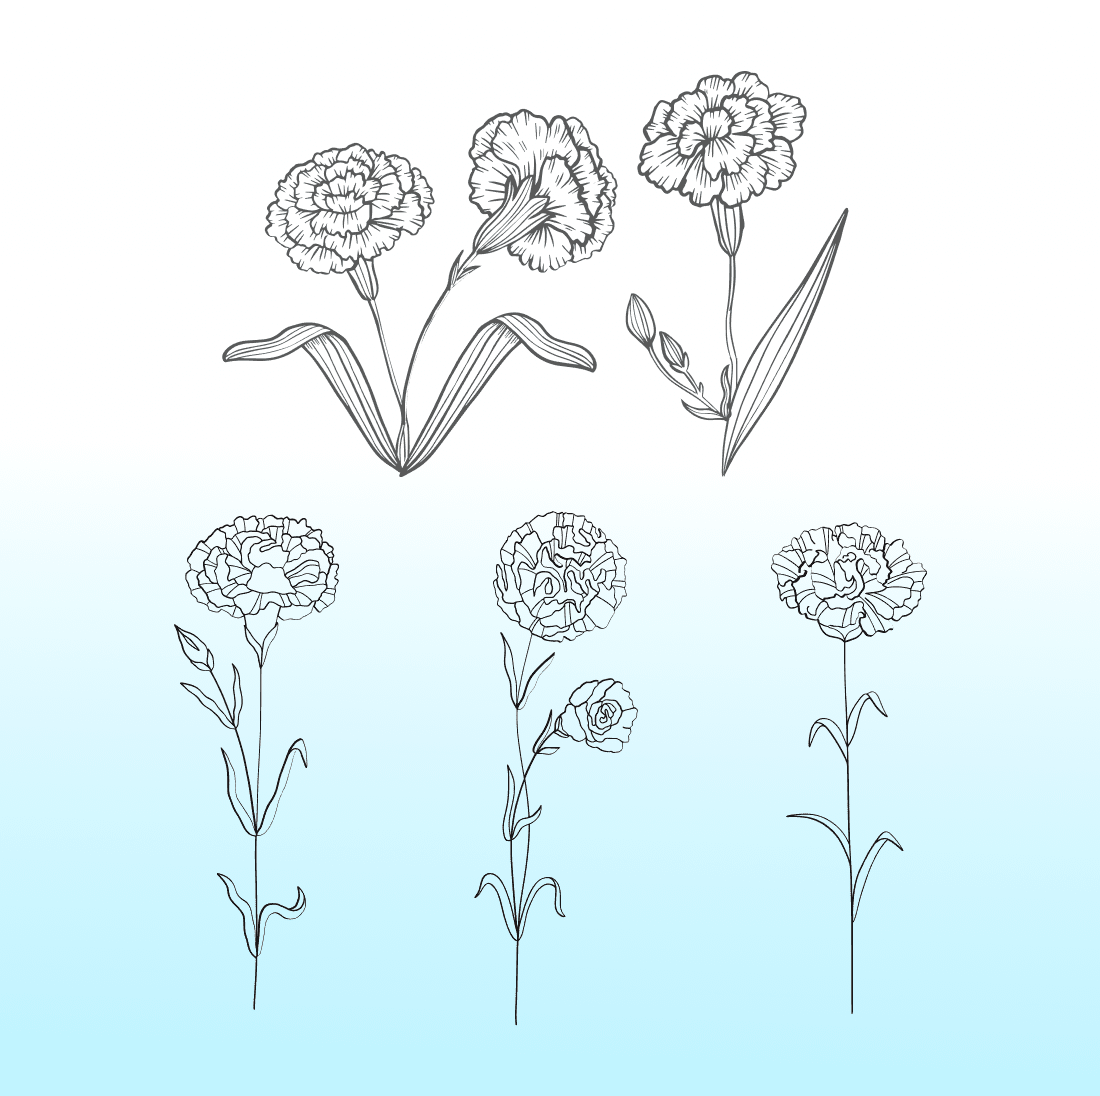 Outline of a carnation flower on a white and blue background.